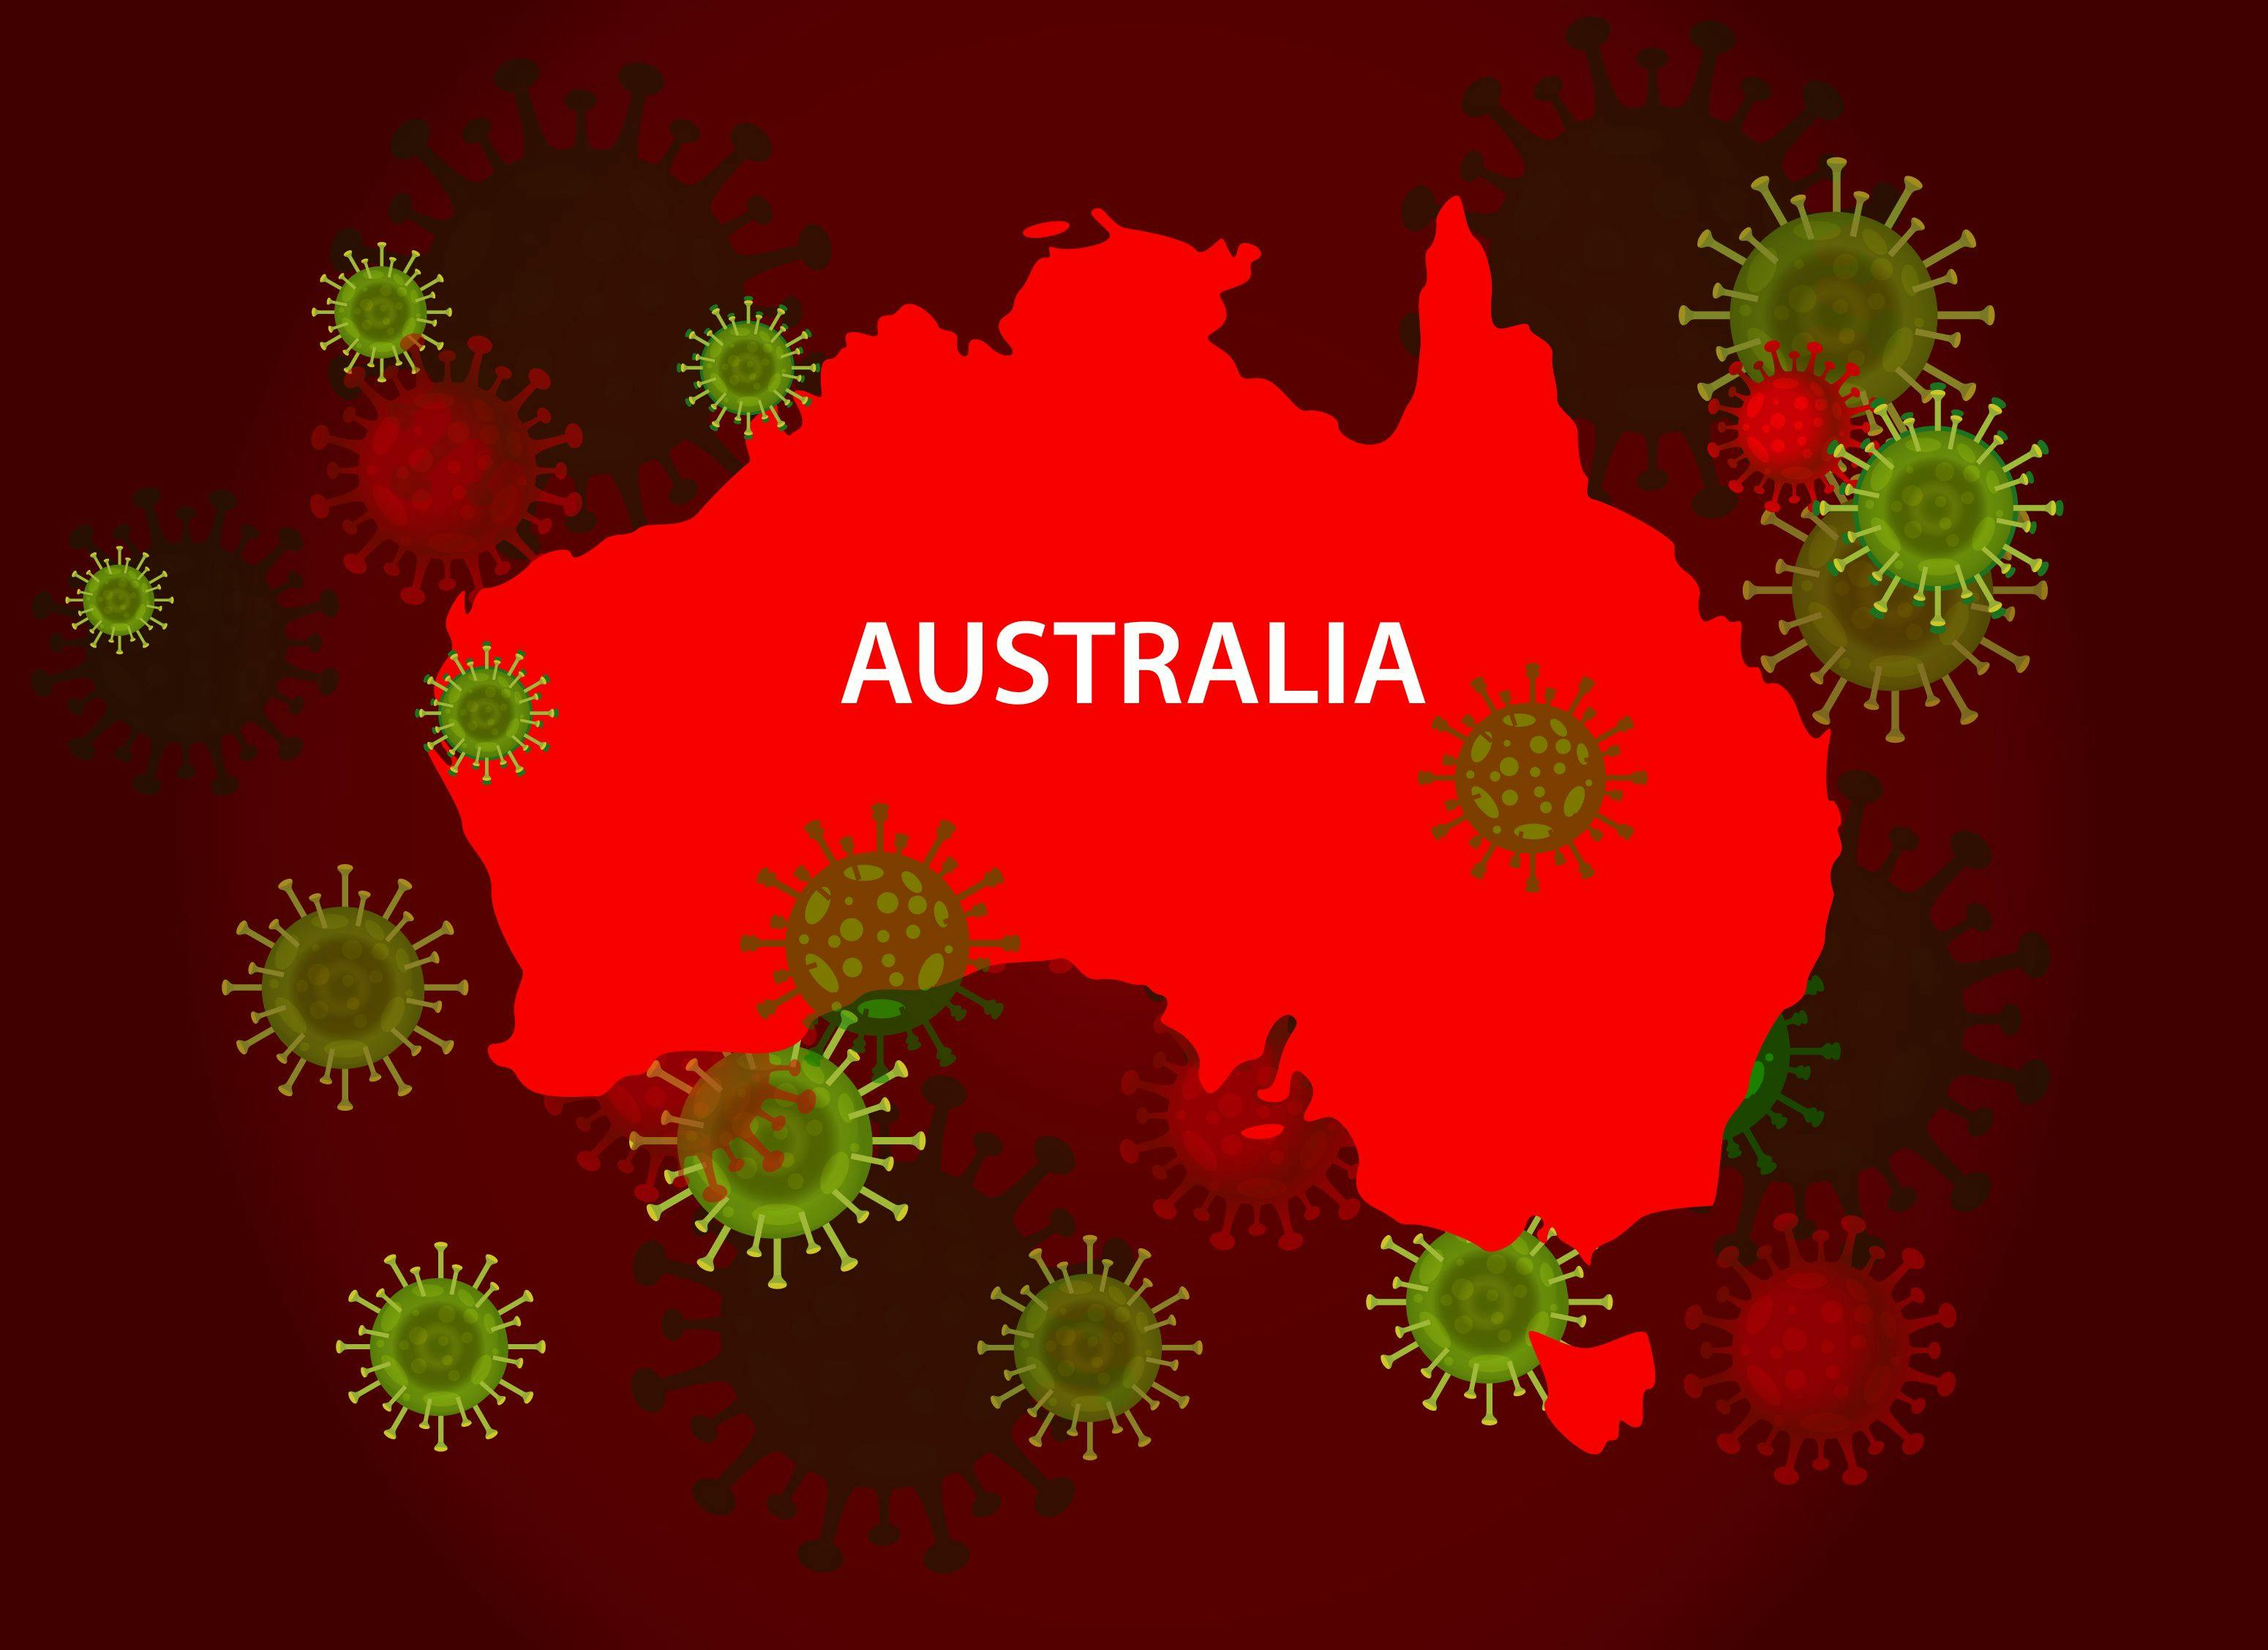 COVID-19: How it's affecting veterinary practices in Australia